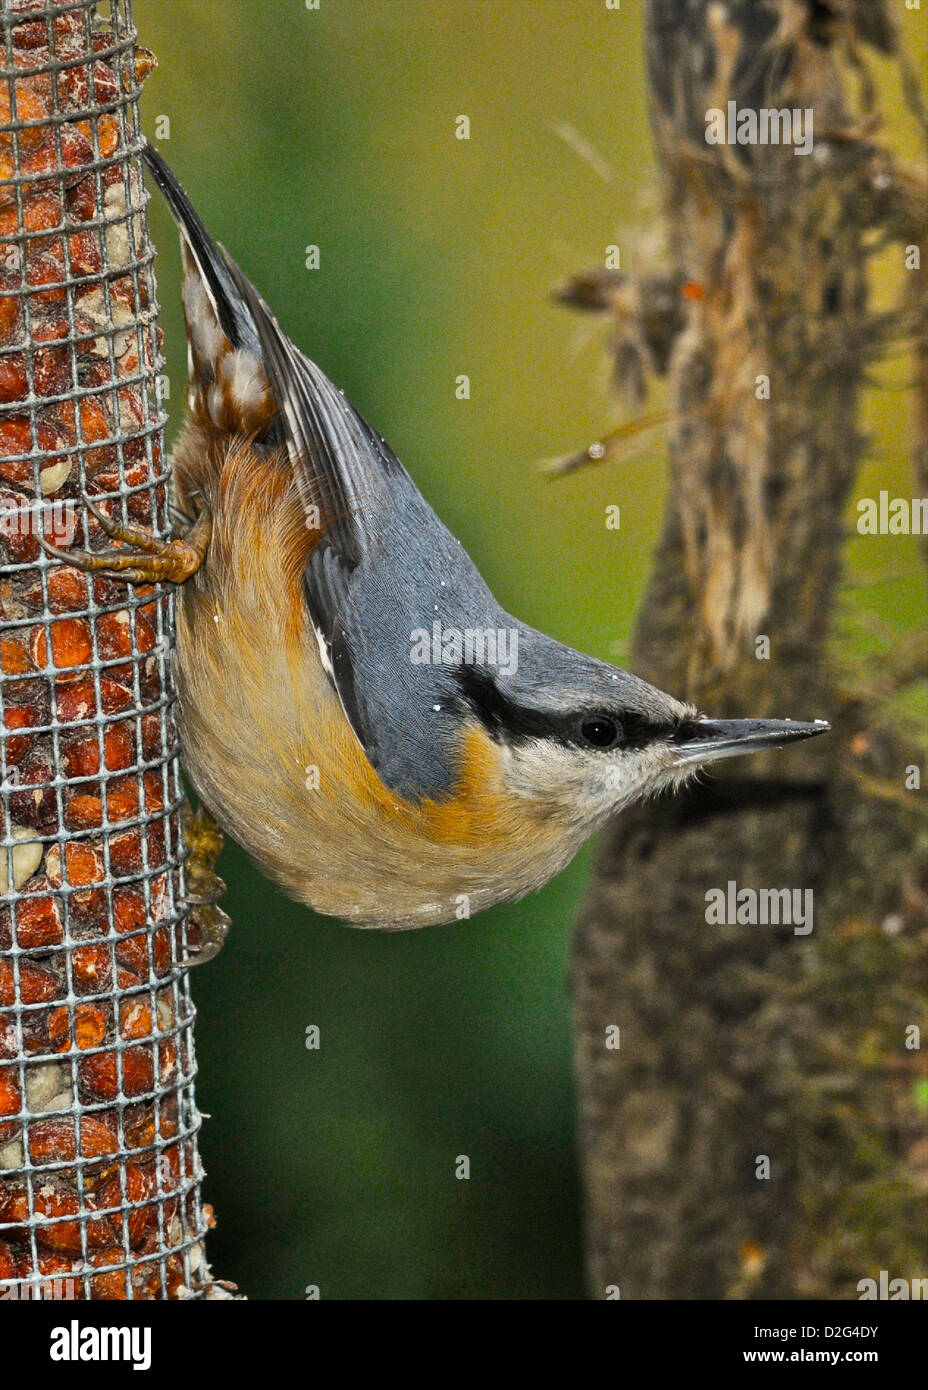 Nuthatch (Sitta europaea) This is the only species of nuthatch in the UK. Unlike woodpeckers and treecreepers, they descend tree trunks headfirst. Stock Photo